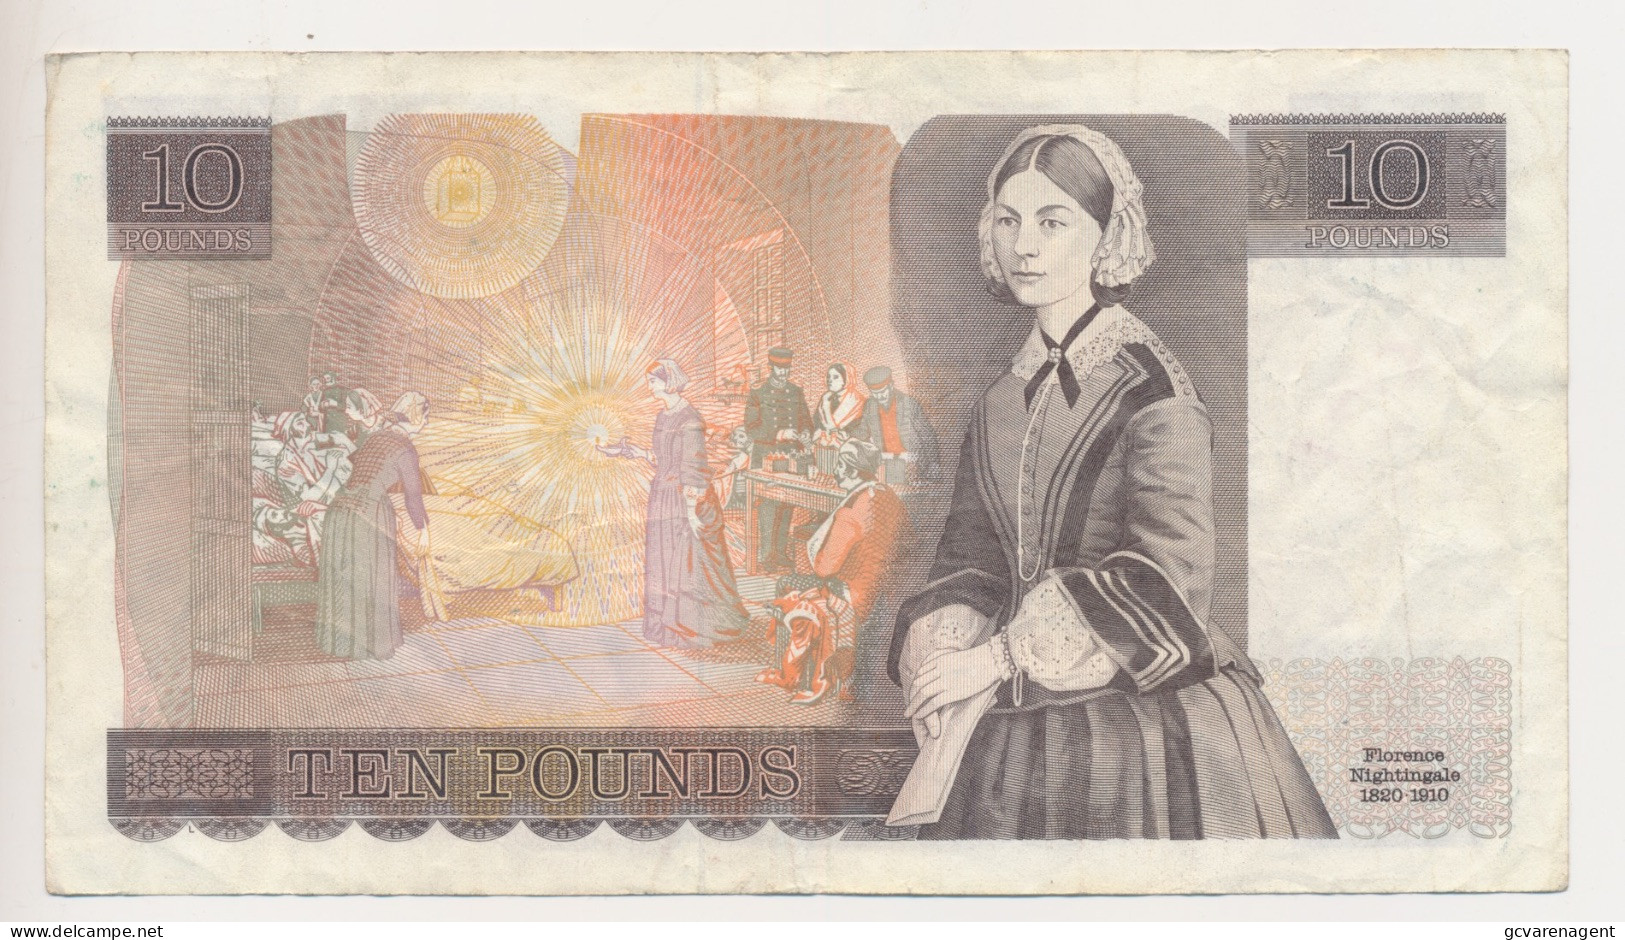 10 POND  BANK OF ENGLAND. SIGNED  D.H.F. SOMERSET  - Queen Elizabeth II/ Florence Nightingale - 10 Pounds